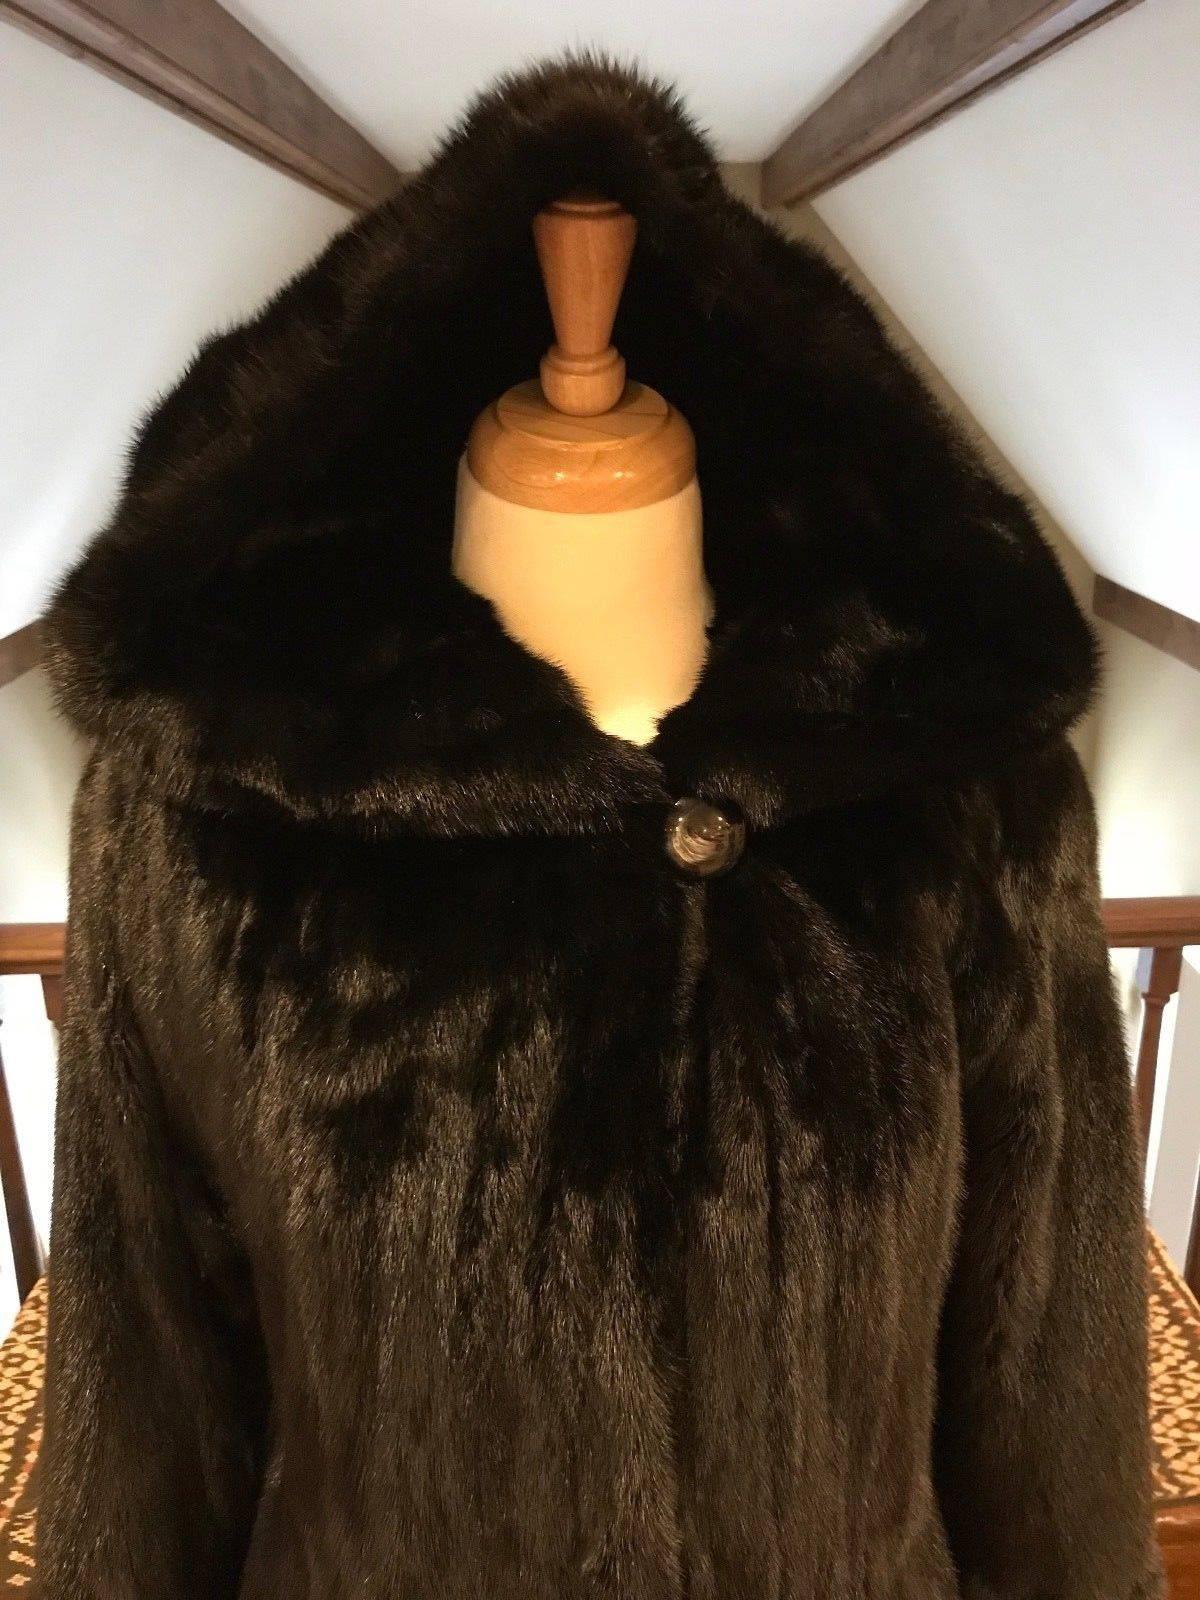 MODEL - Fabbri Furiers Chicago Full Length Canadian Female Mink Felts Coat with Hood and Belt

SKU - 1689

ORIGINAL RETAIL PRICE - $15000 + tax

SIZE - Small (6 to 8)

MODEL DETAILS - Custom Hand Made by Fabbri Furiers Chicago

MATERIAL - Canadian